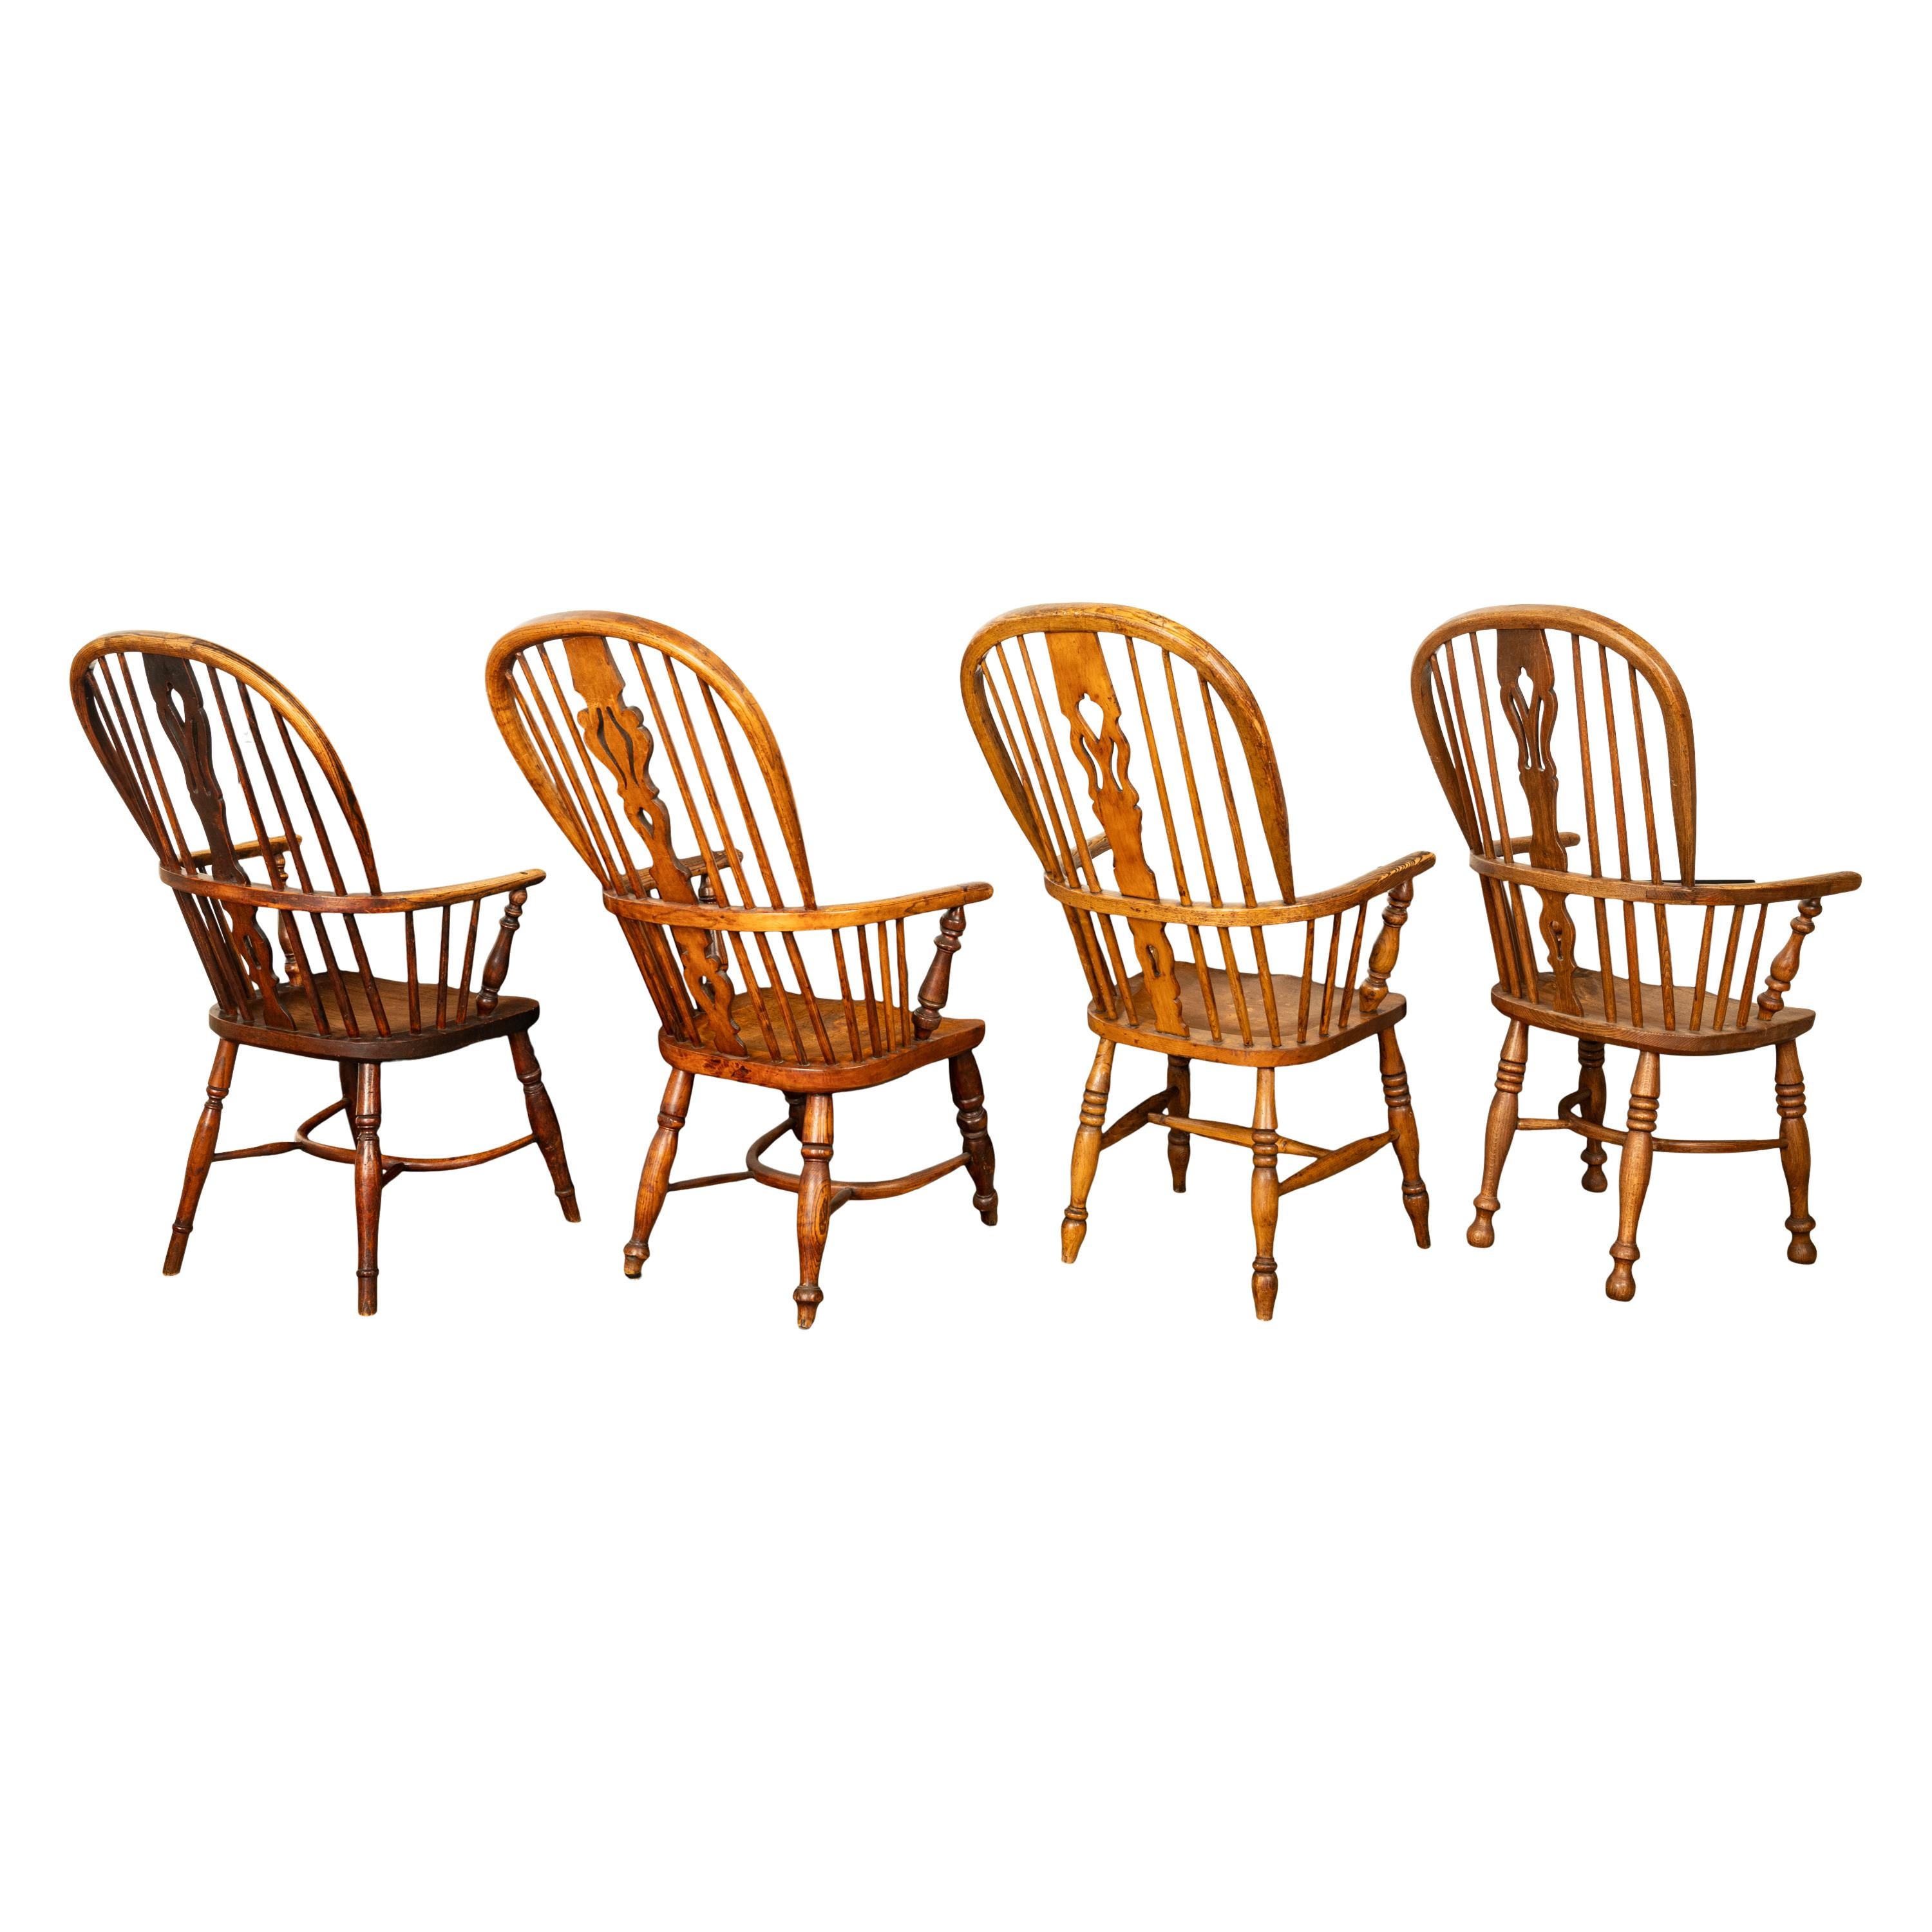 Set 4 Antique 19thC High-backed English Ash Elm Country Windsor Arm Chairs 1840  For Sale 6